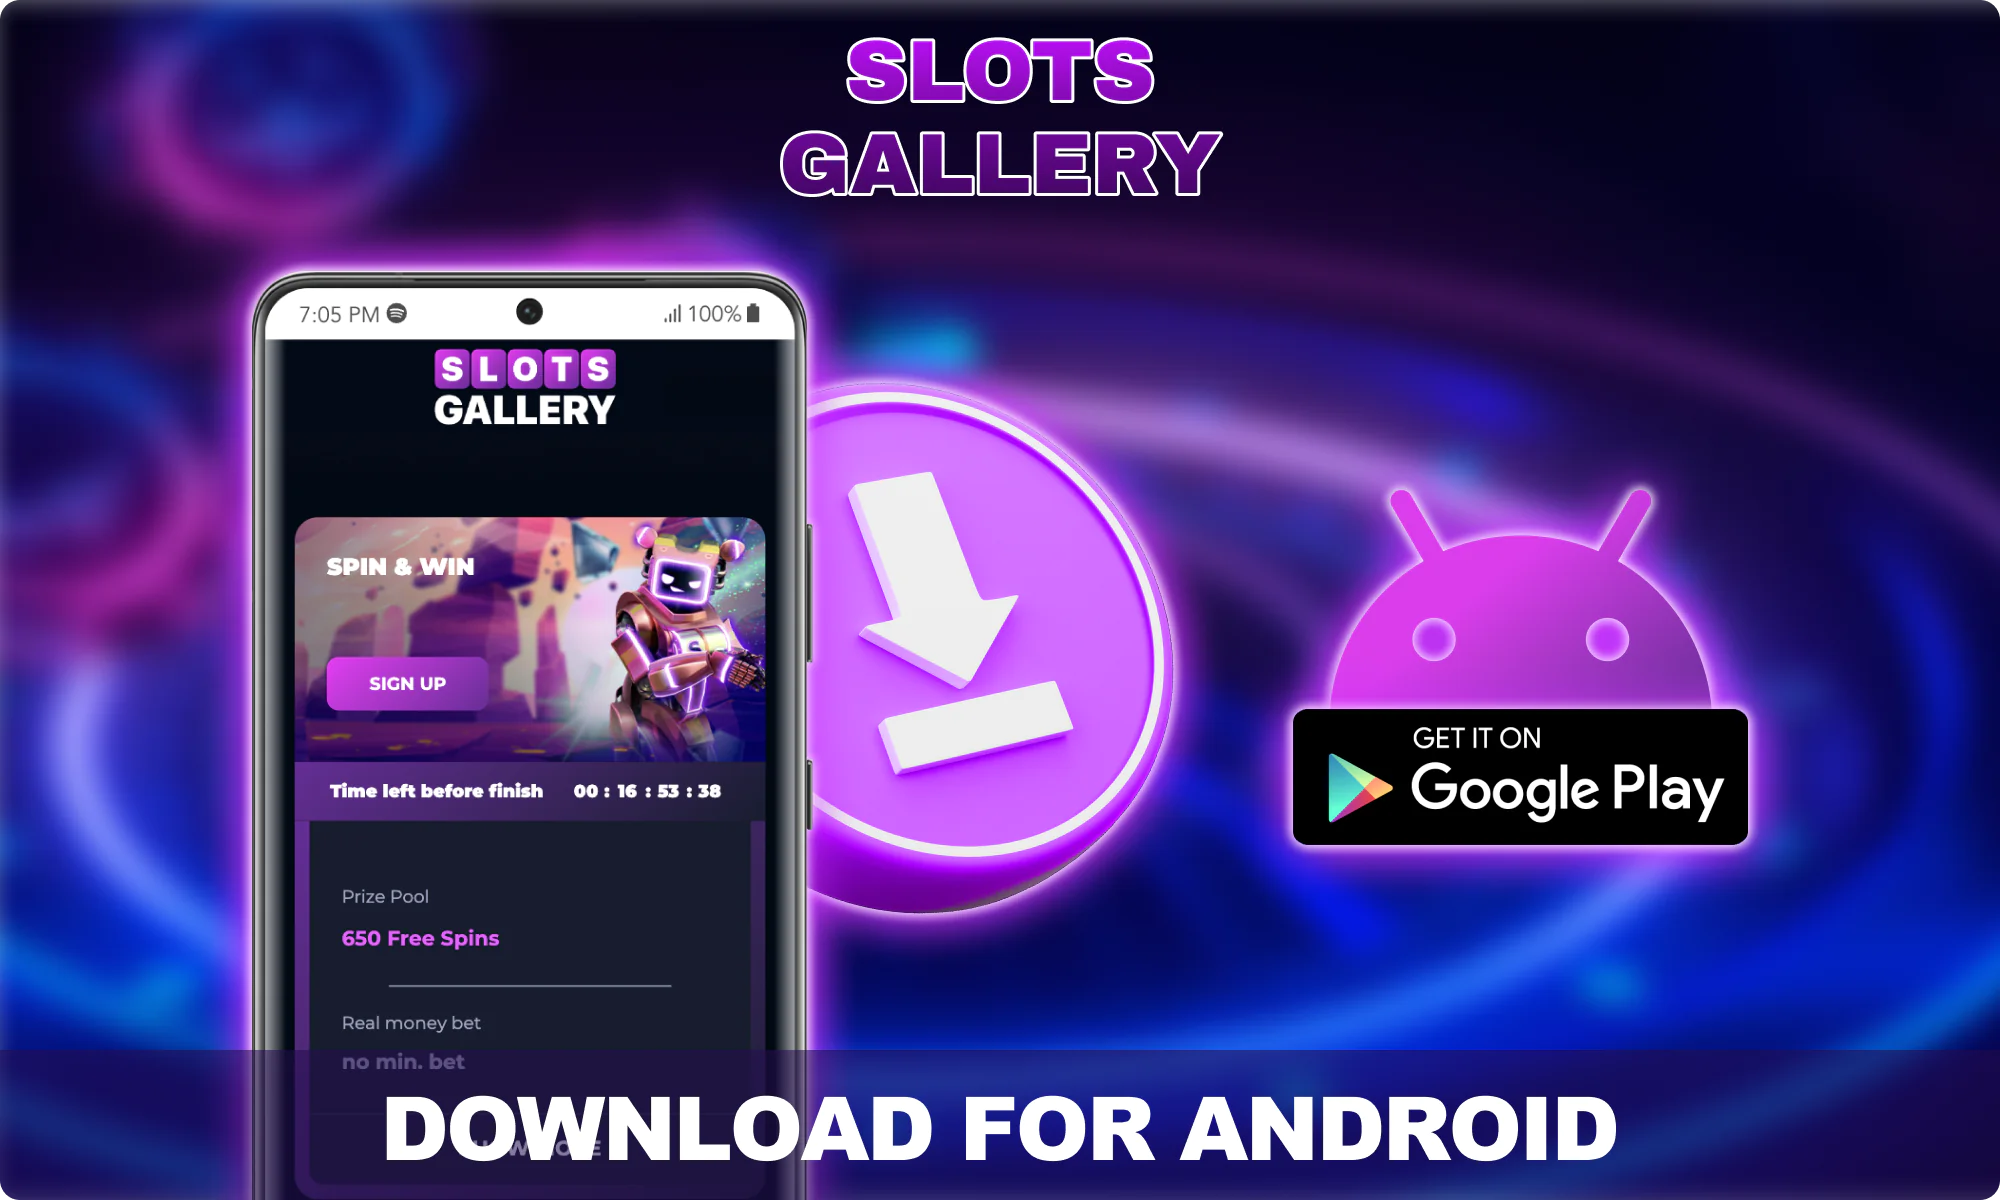 Slots Gallery App Download for Android